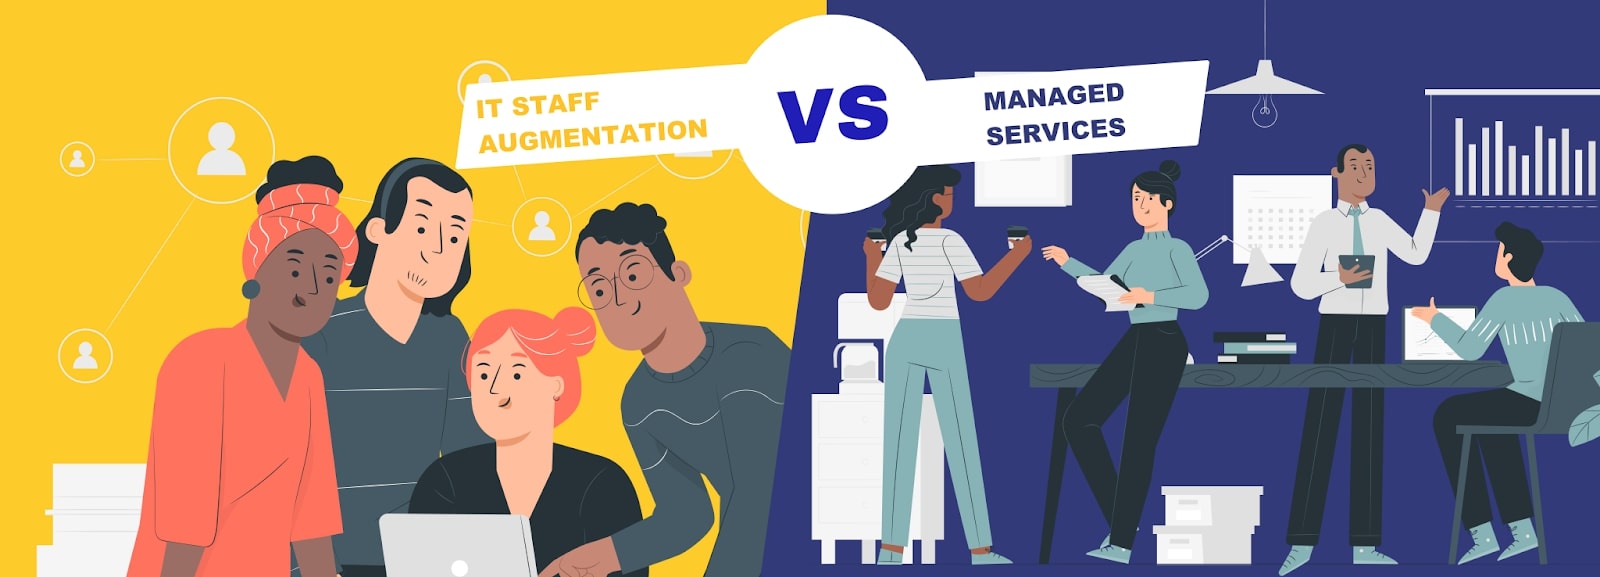 Distinction Between Managed Services and Staff Augmentation